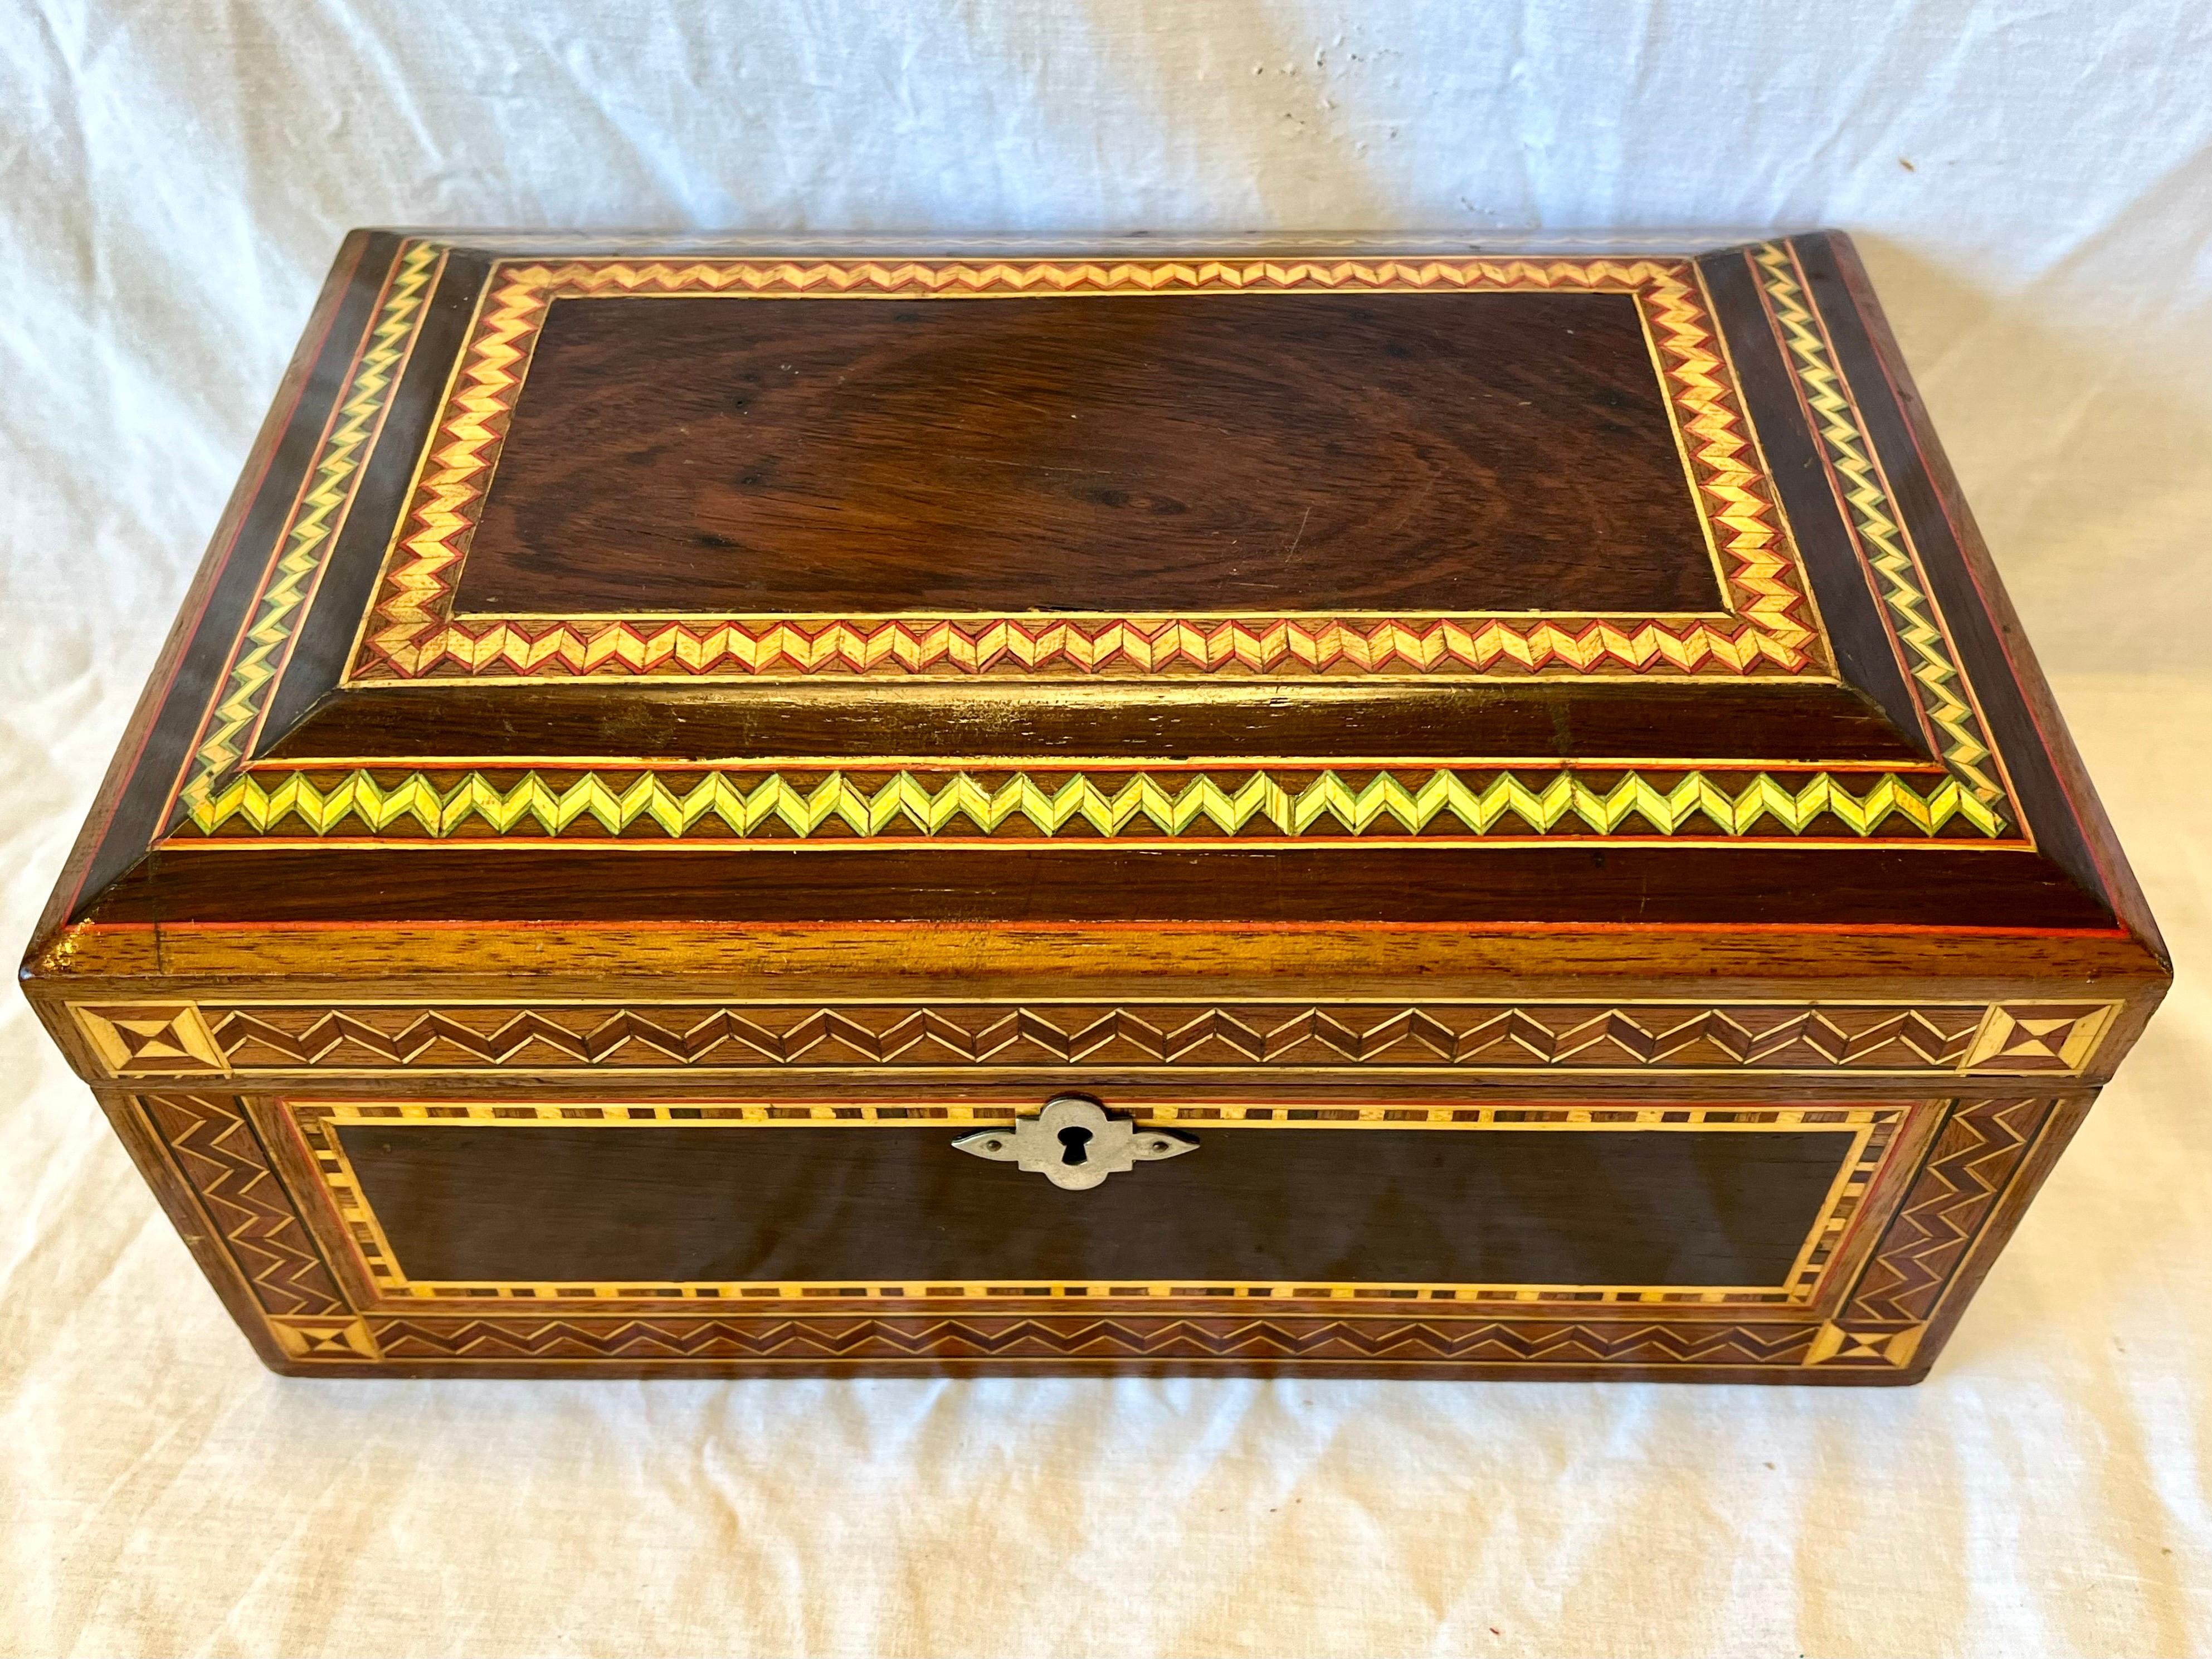 A beautiful vintage marquetry inlaid jewelry casket or box with a red velvety fabric lining the interior and an oval shaped mirror affixed to the inside of the hinged lid. The wonderfully detailed wood inlay designs are geometric in presentation.